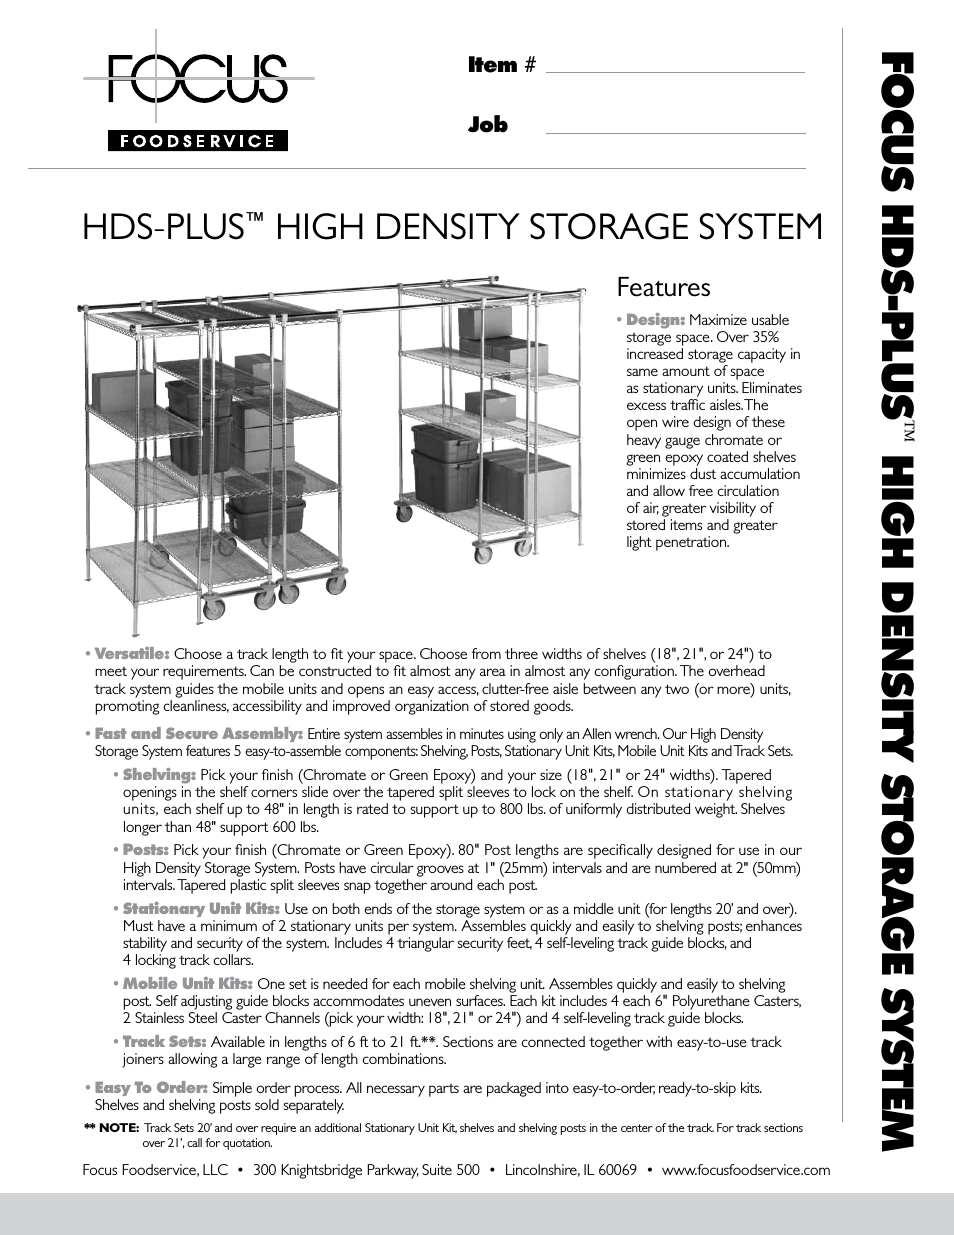 HDS-PluS HigH DenSity Storage SyStem - Specification Sheets